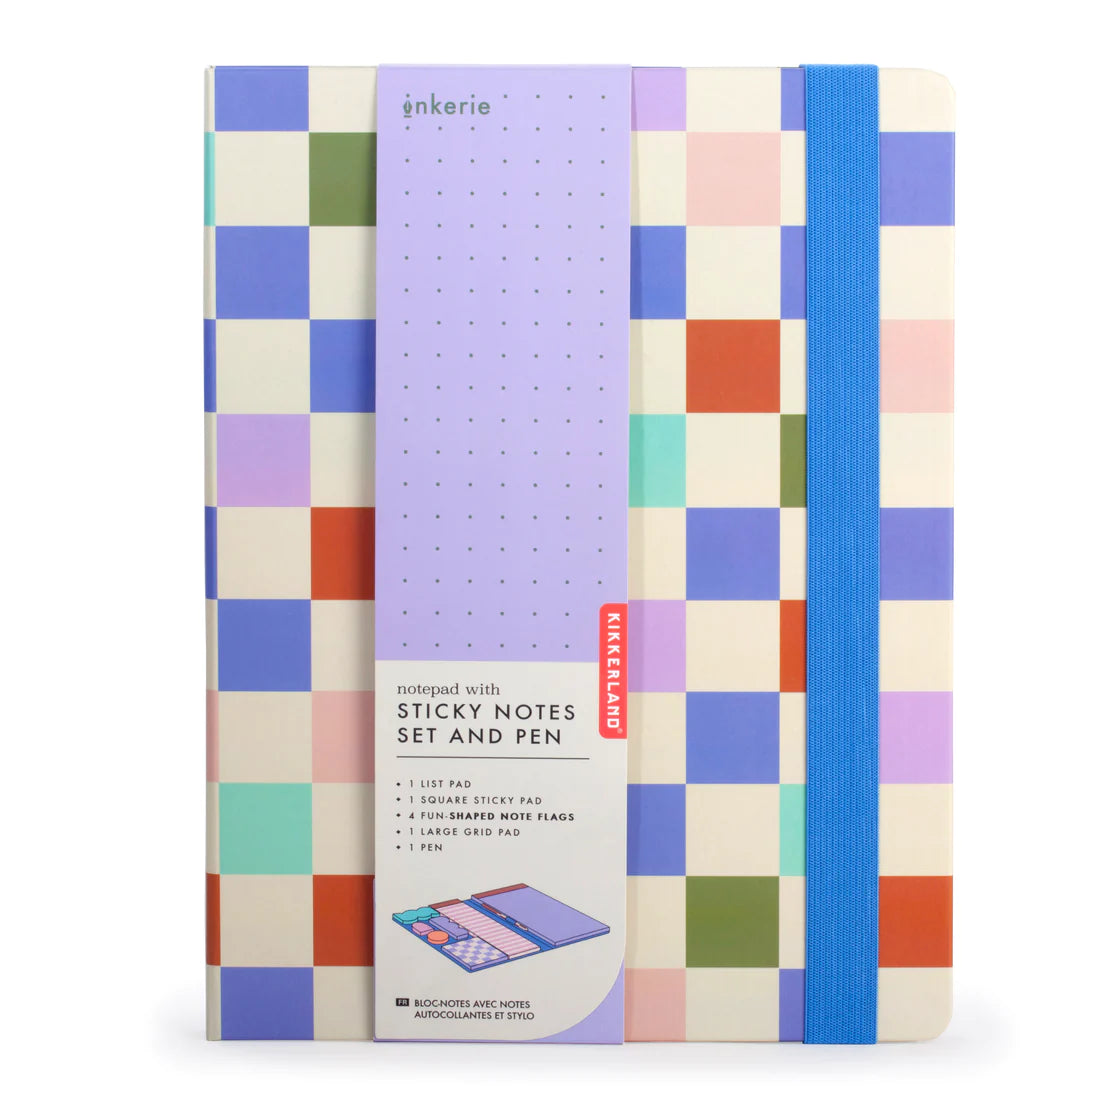 Notepad with Sticky Notes and Pen